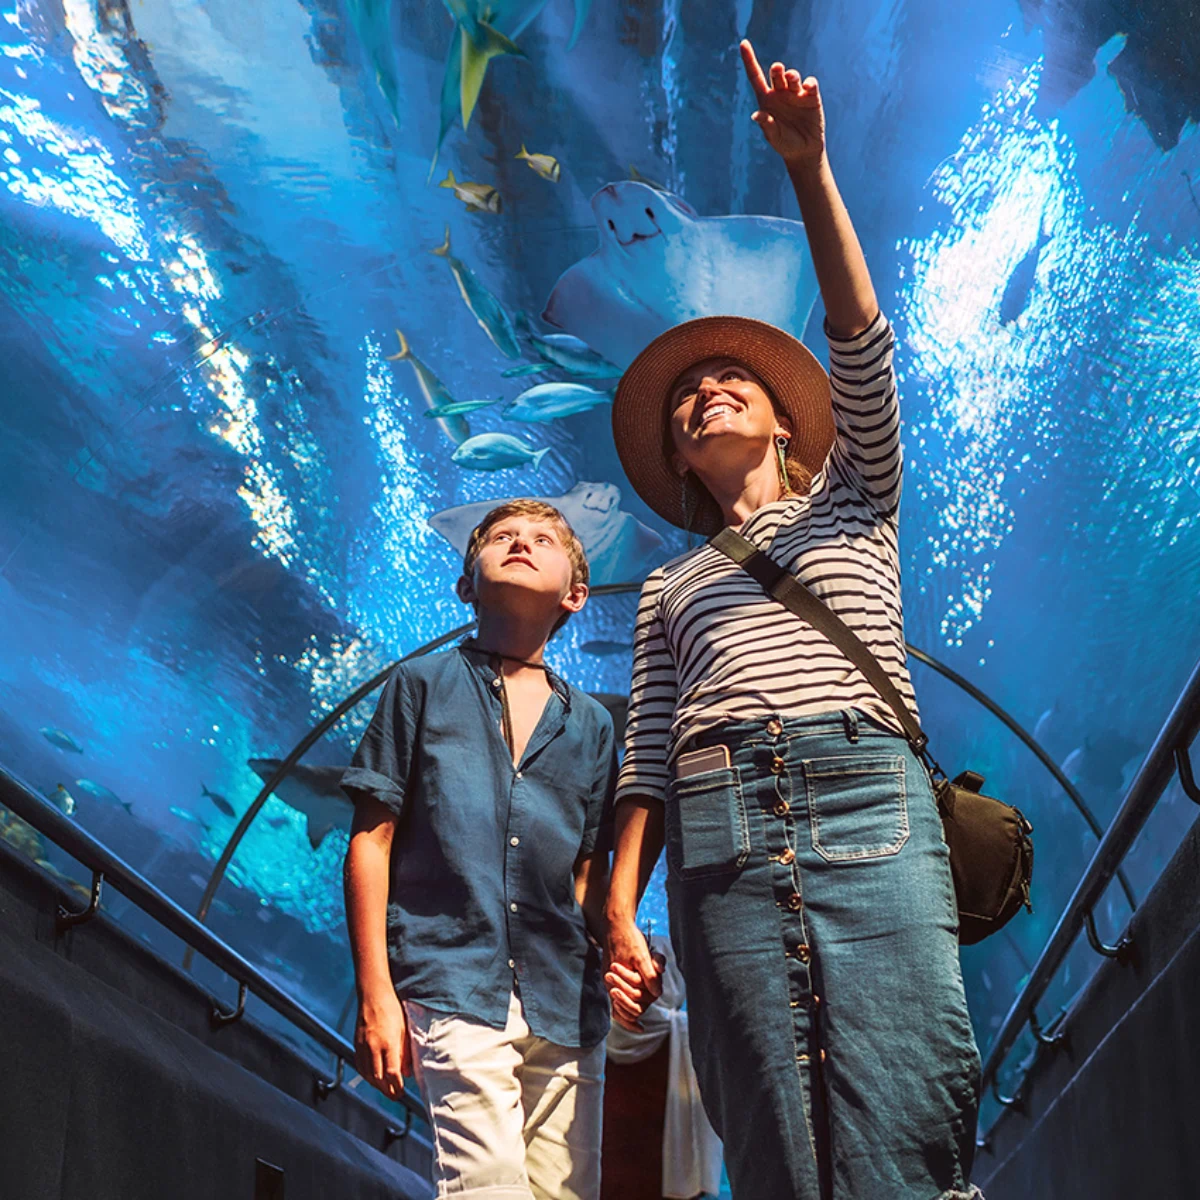 SEA Life Berlin, mother and son walk through the shark tunnel and marvel at what fish swim above them, the mother points forward with her left hand and index finger